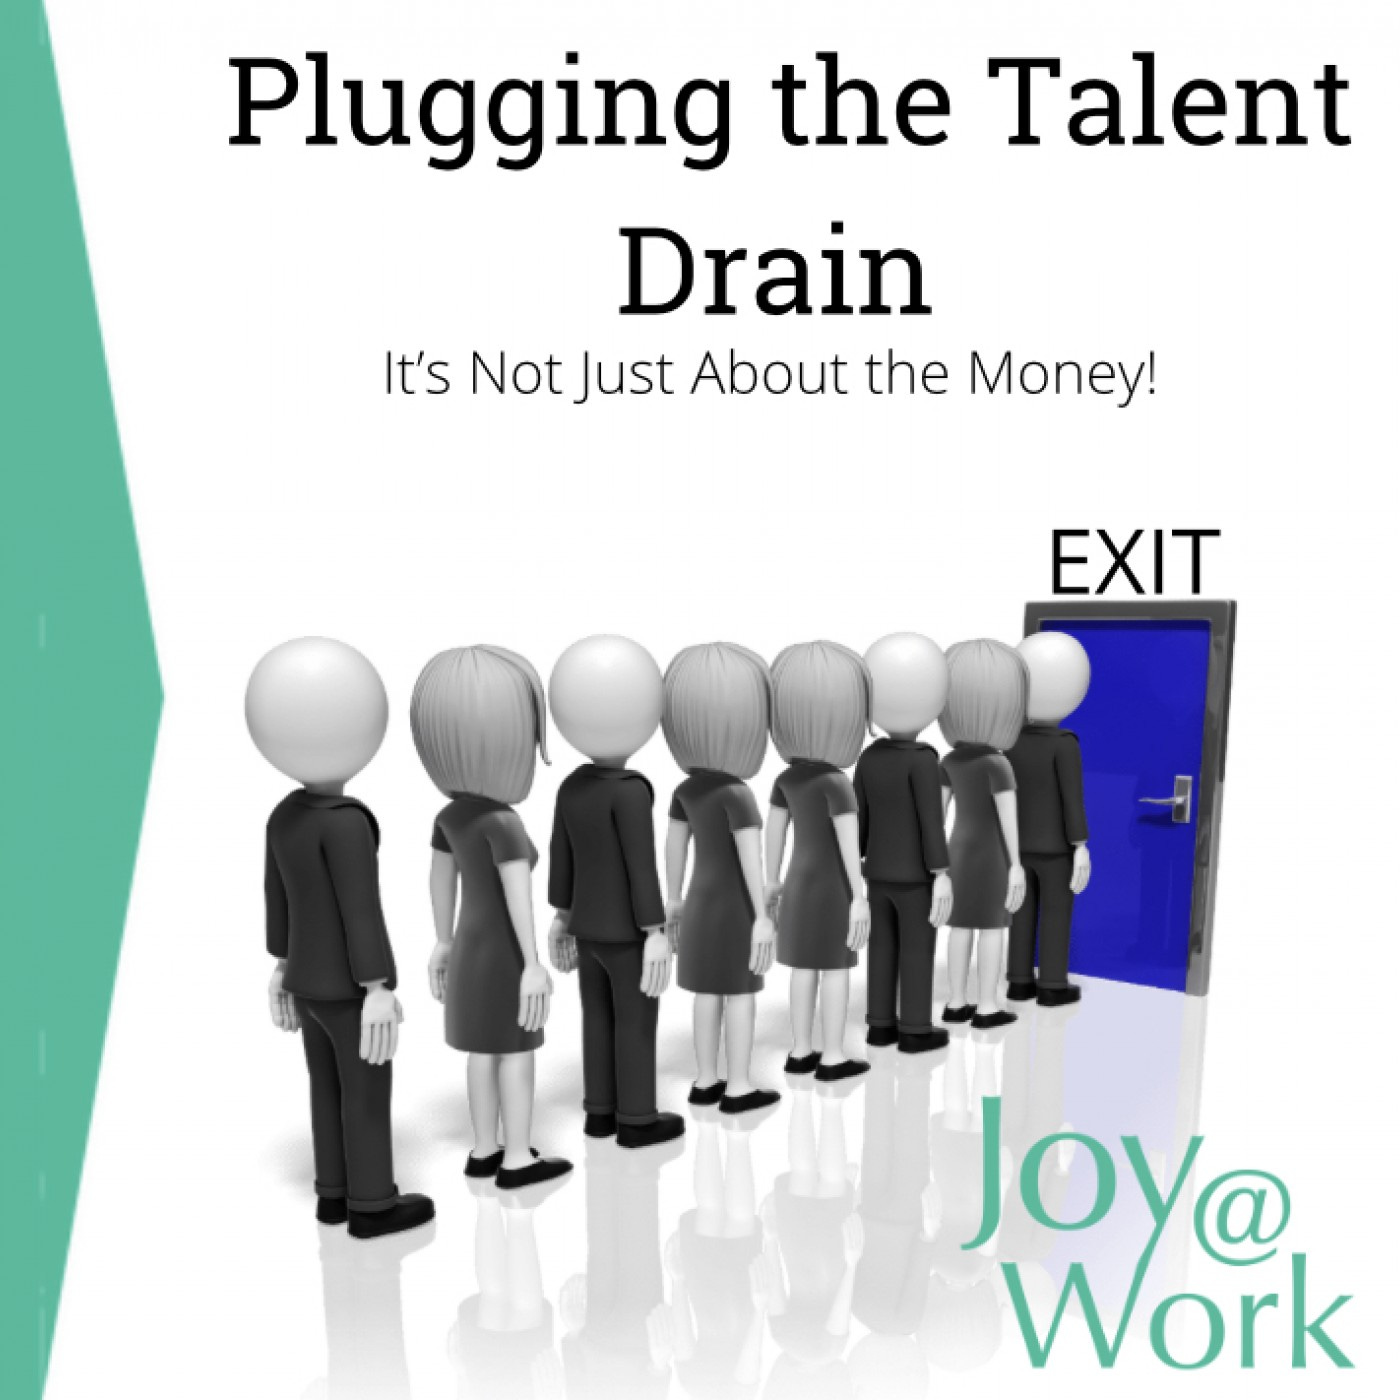 Plugging the Talent Drain